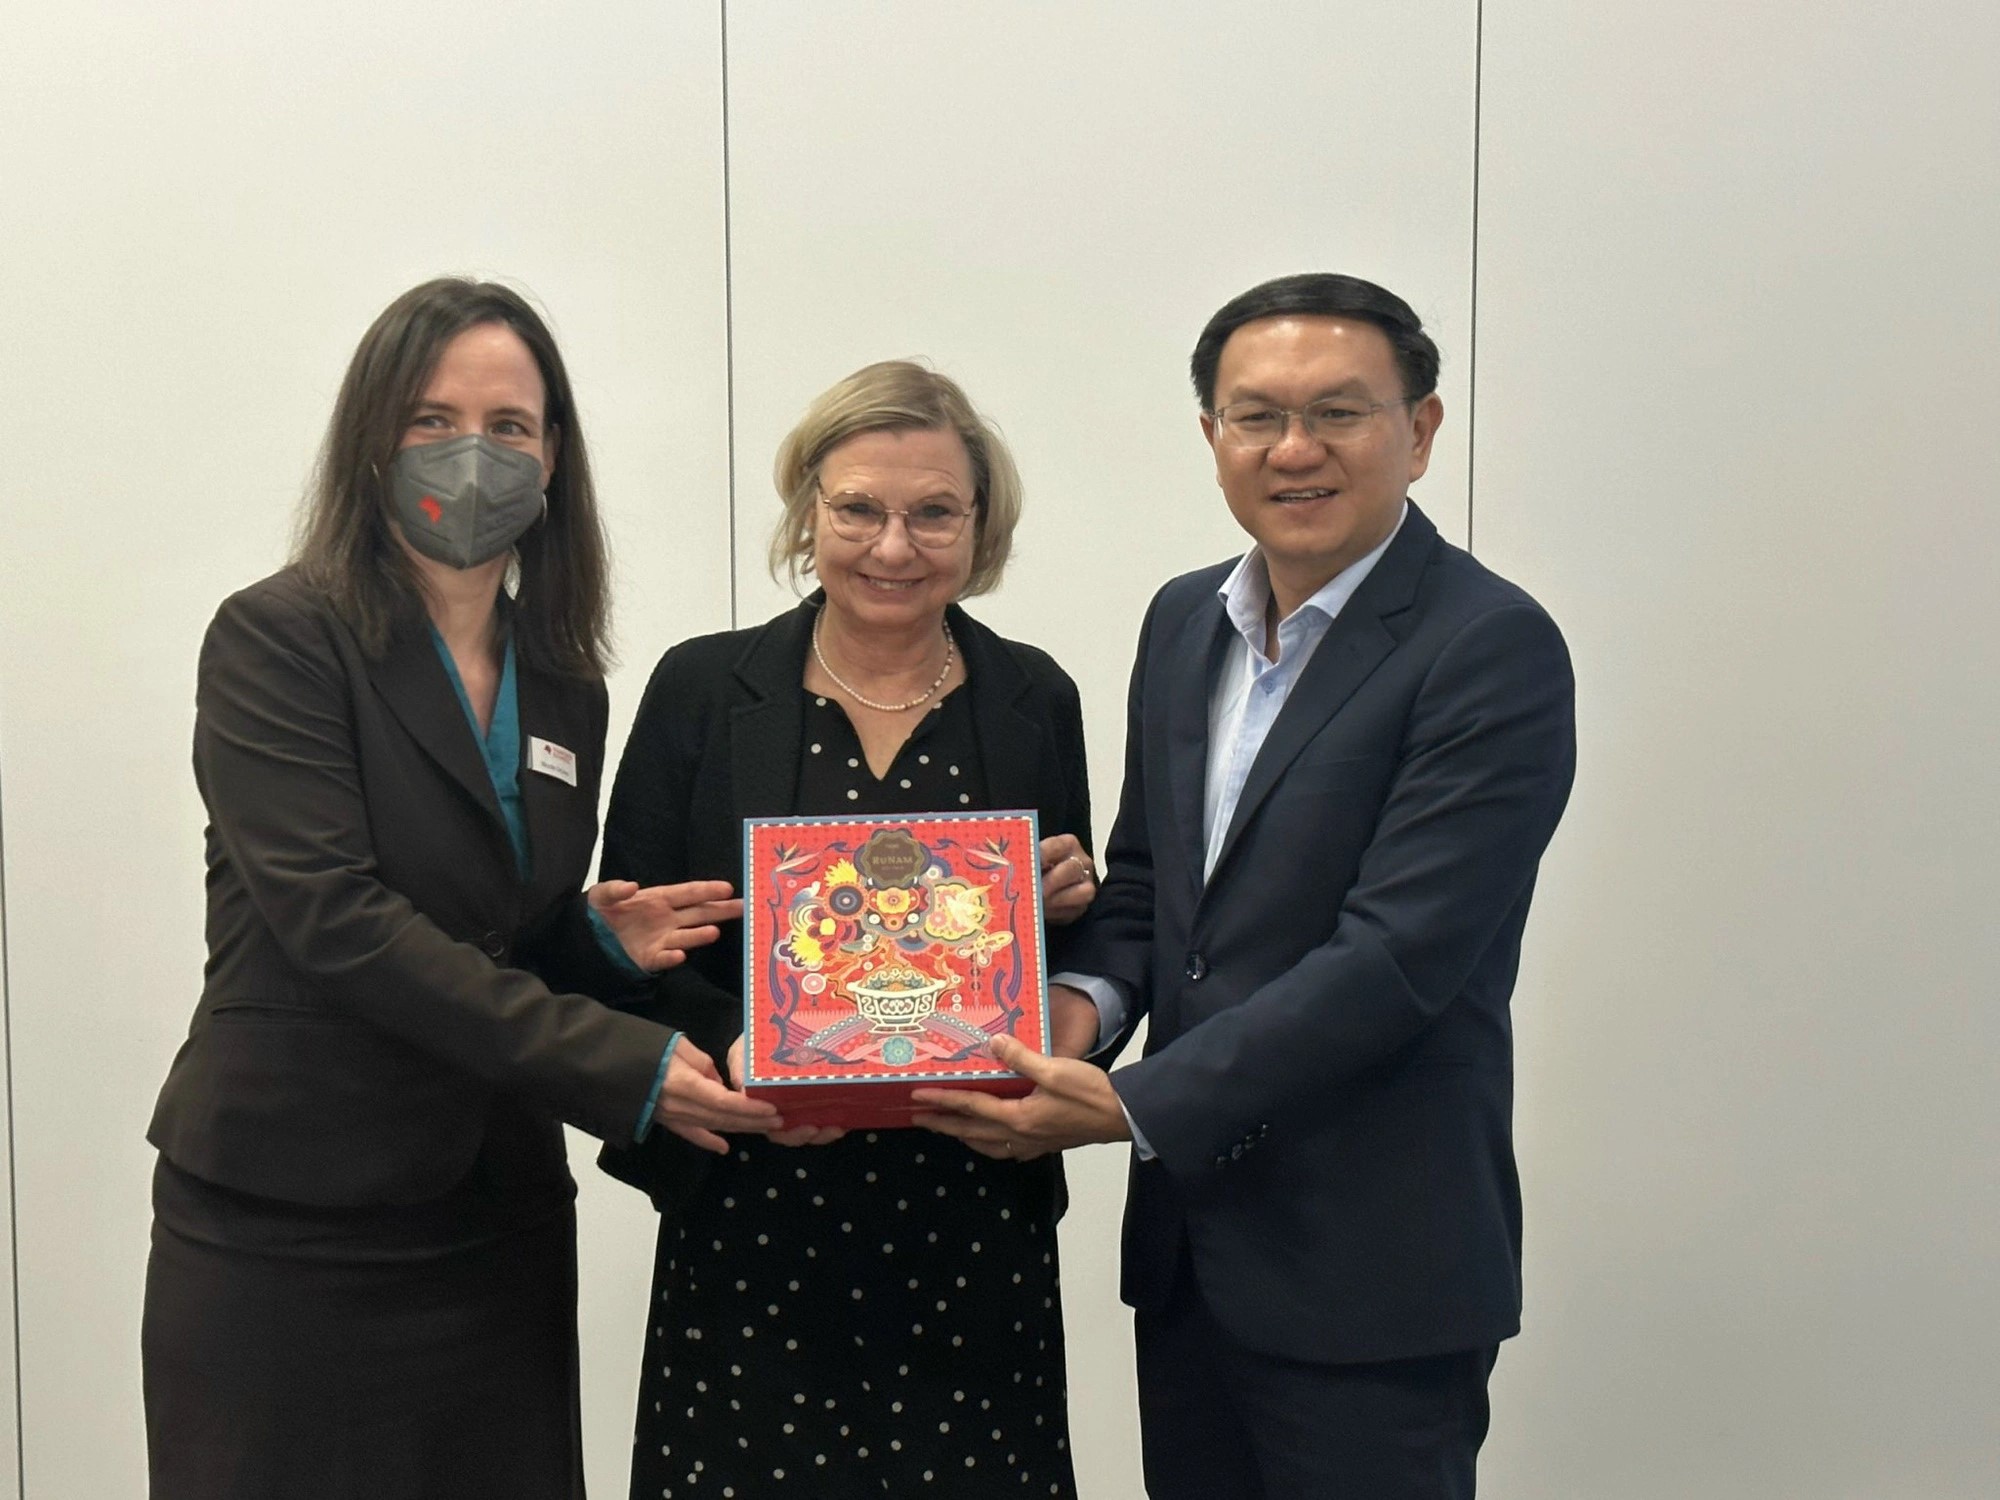 Lam Dinh Thang (right), Director of Department of Information and Communications, gives gifts to Claudi Kaiser, Vice President of Frankfurt Book Fair